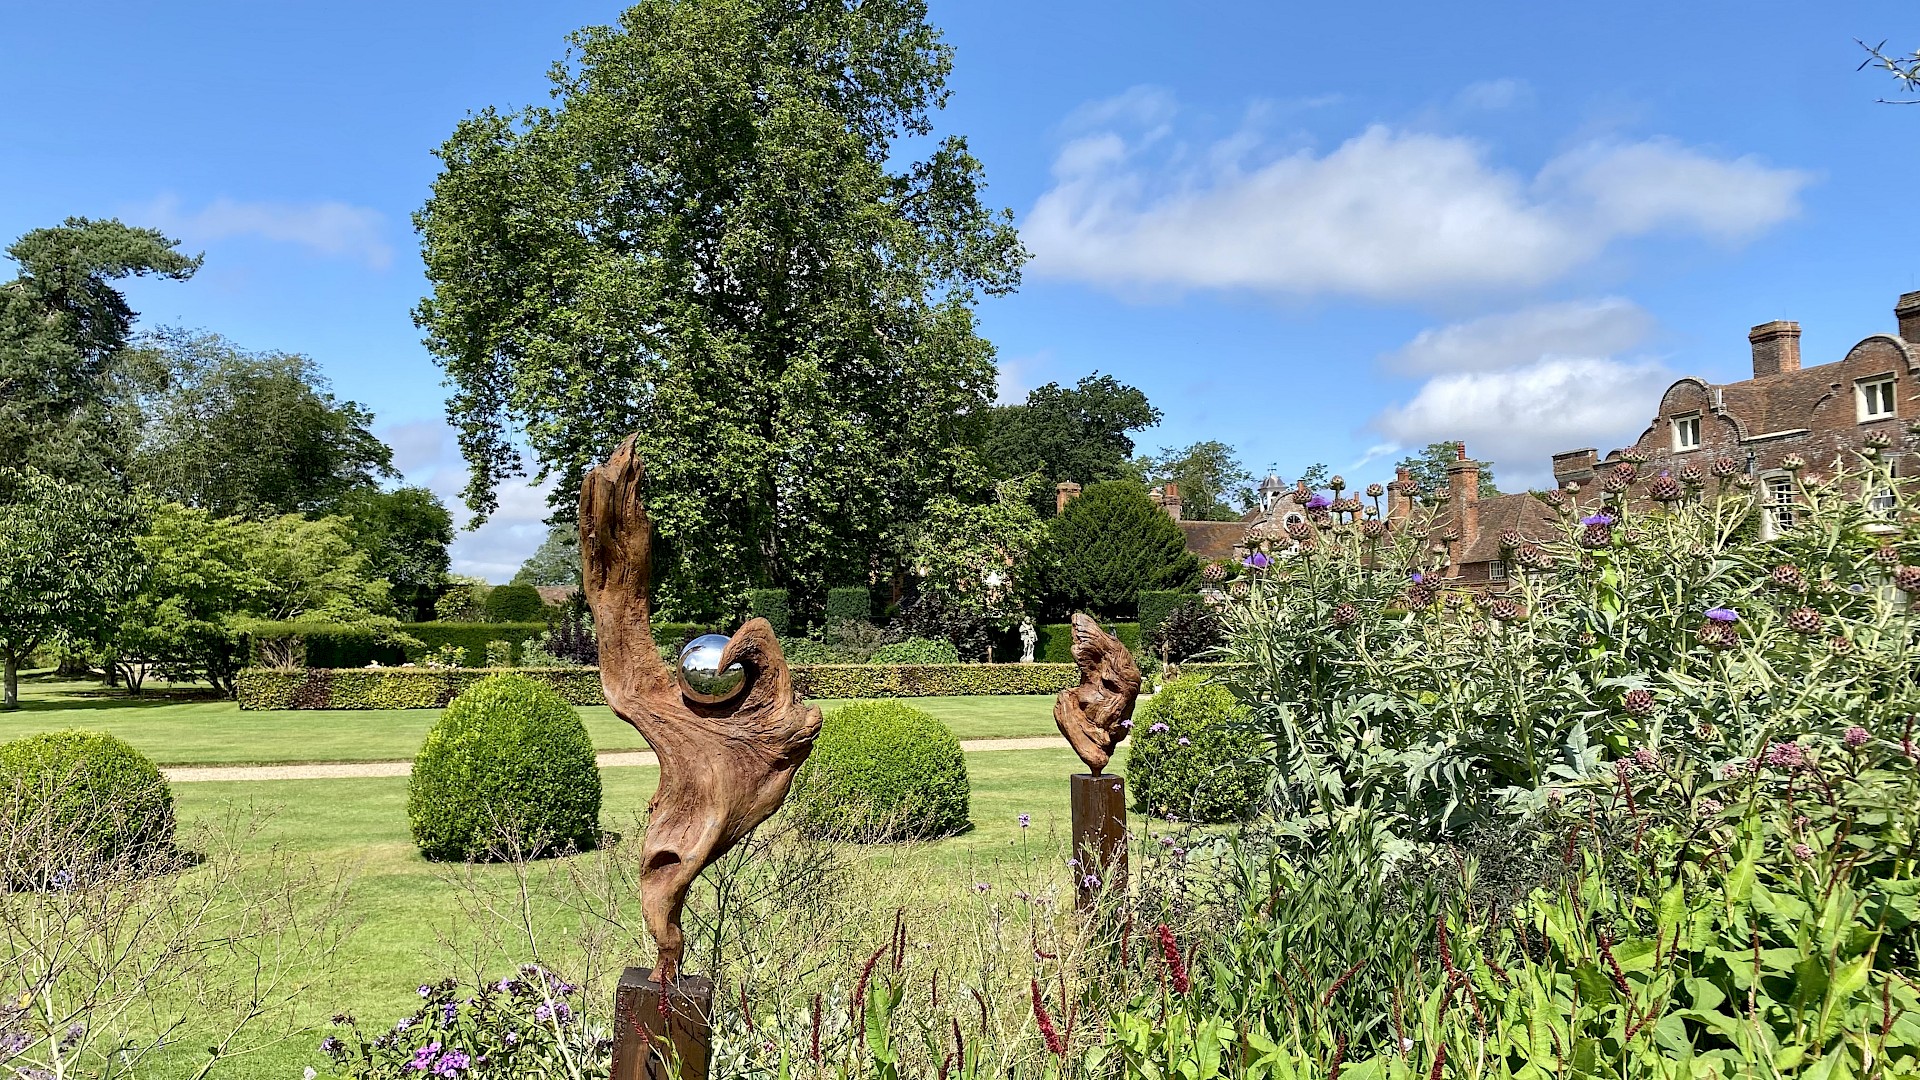 Sculpture in the Gardens Image